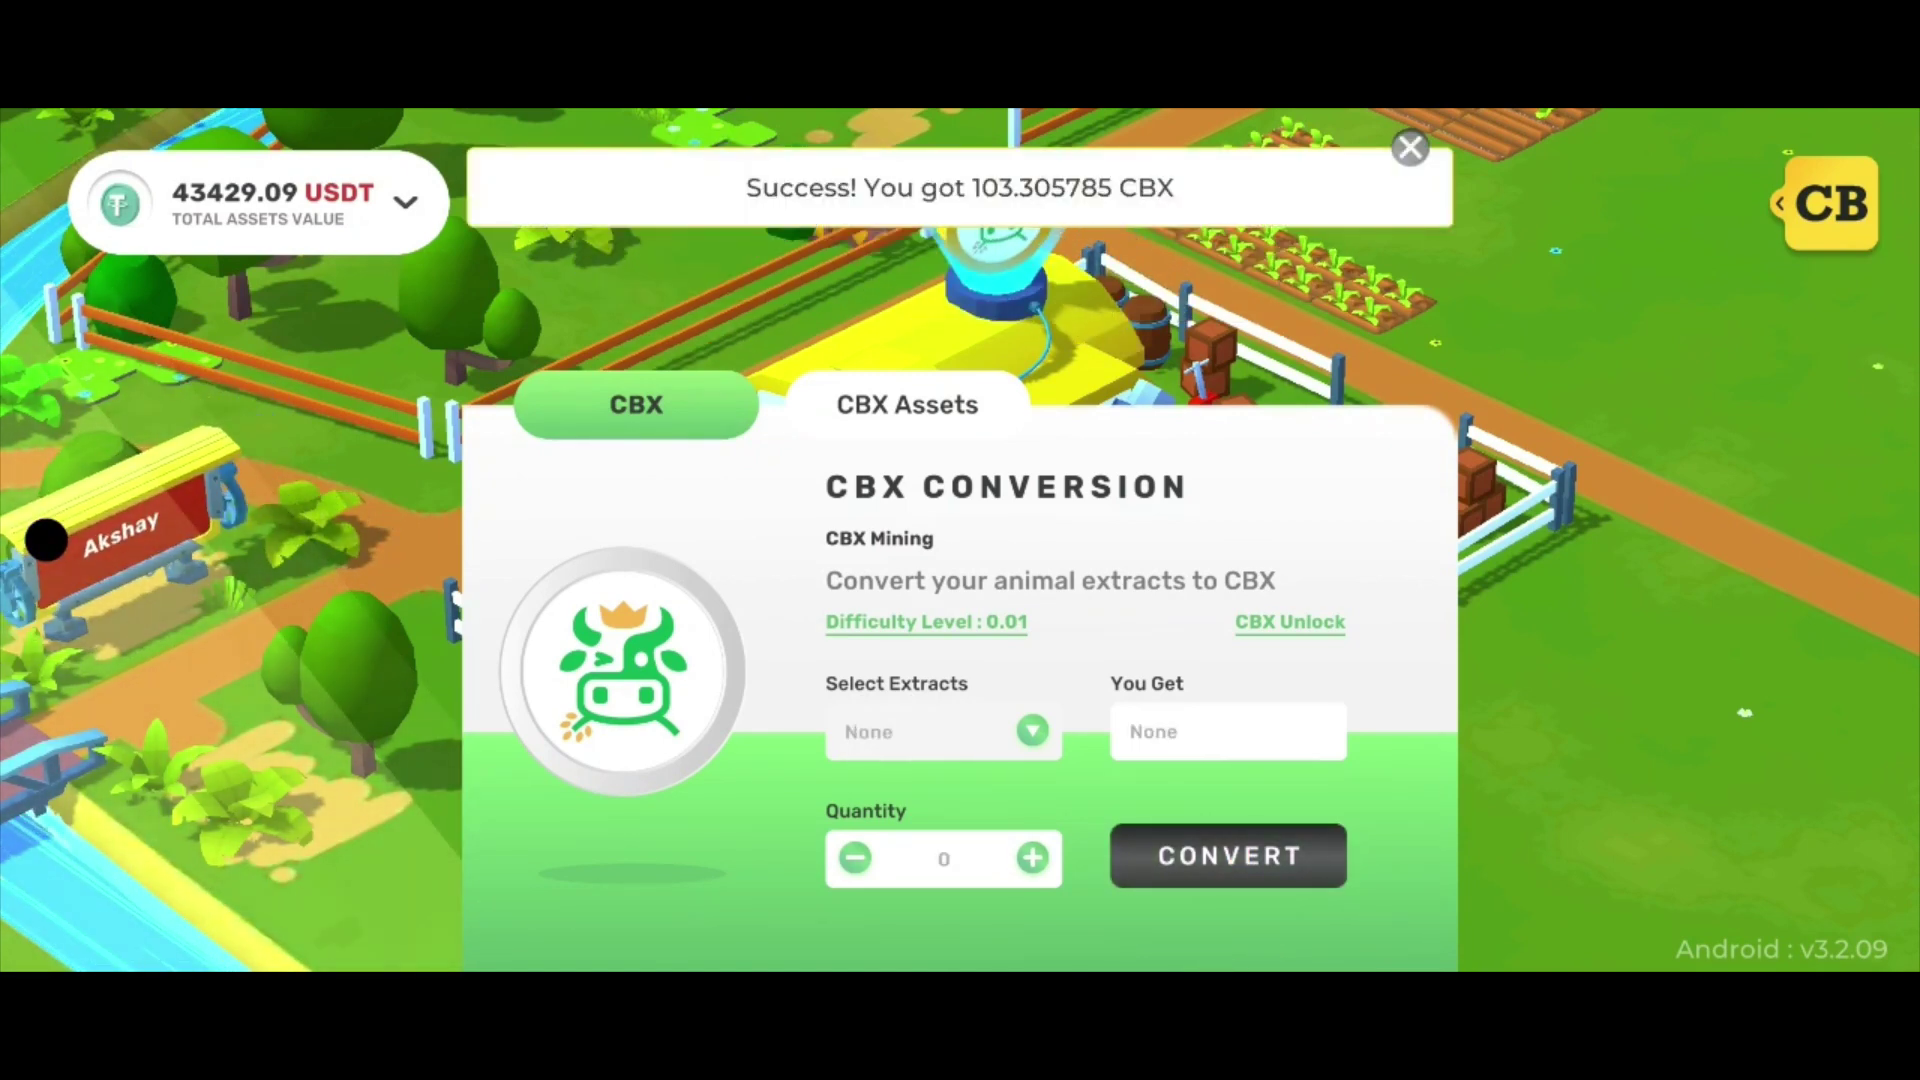 In the game CropBytes, you can convert your Assets such as harvested crops and animal produce into CBX tokens. These can be used to buy more assets to increase production.